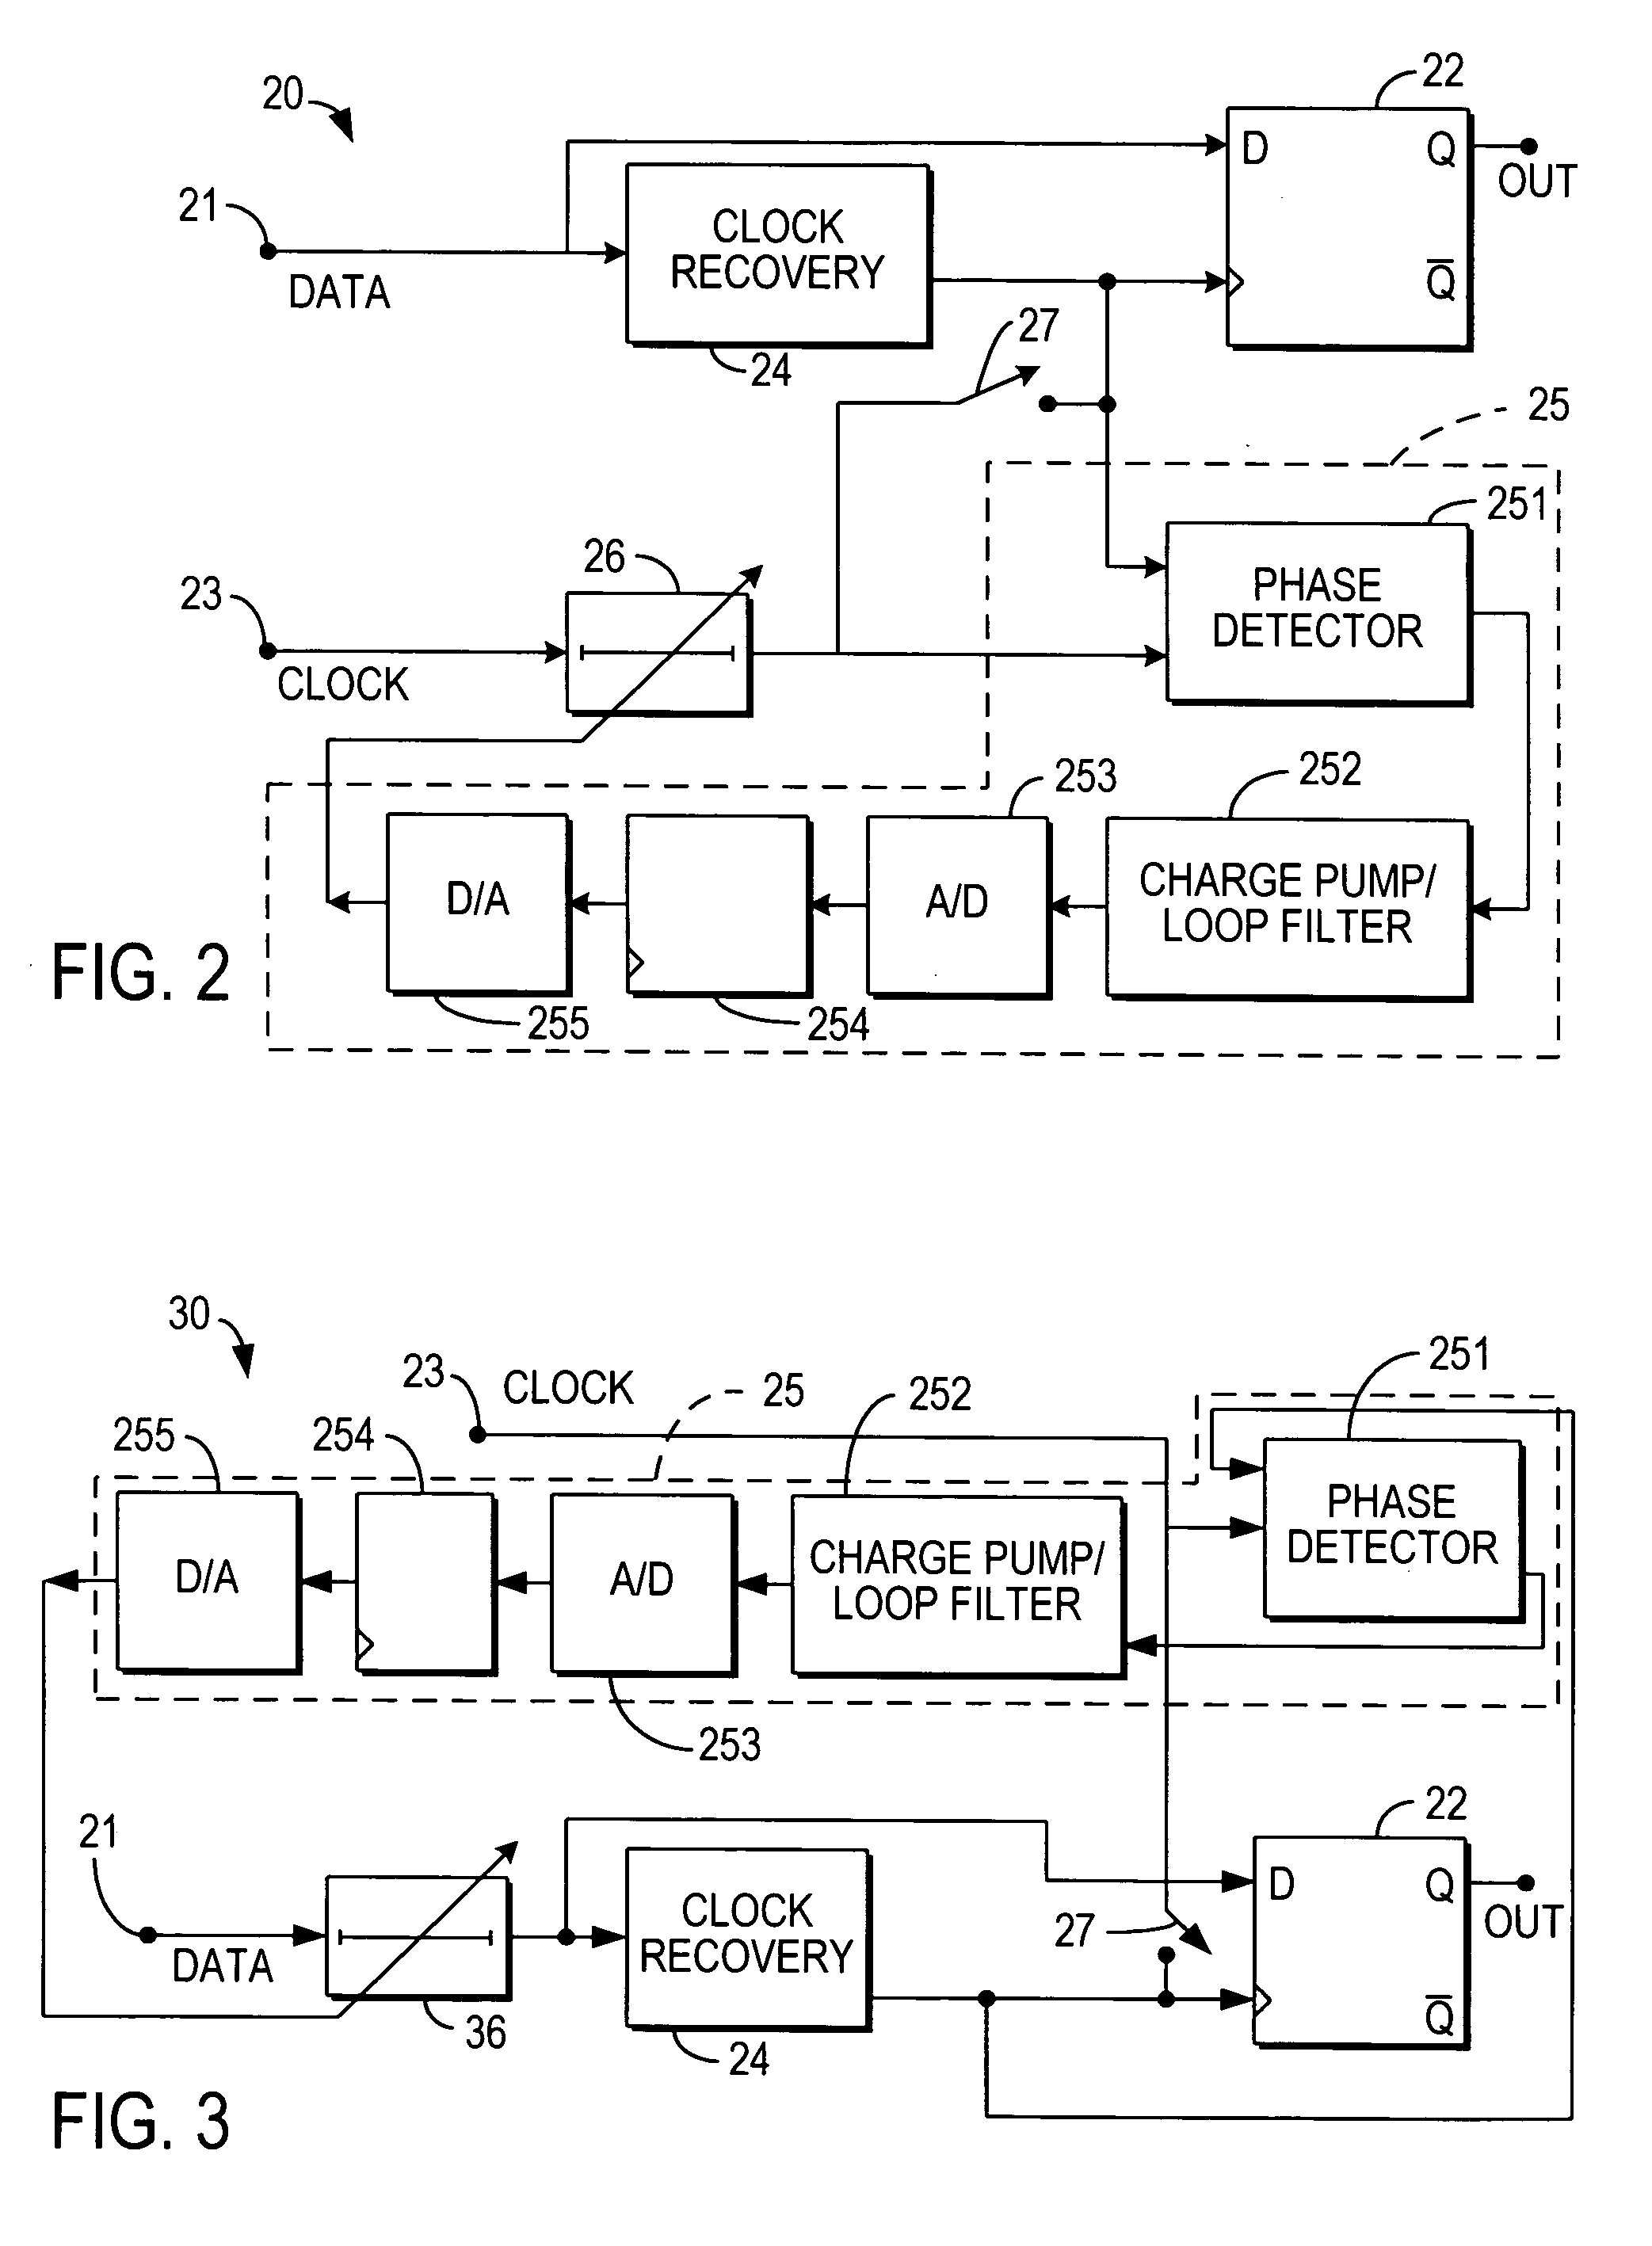 Alignment of clock signal with data signal